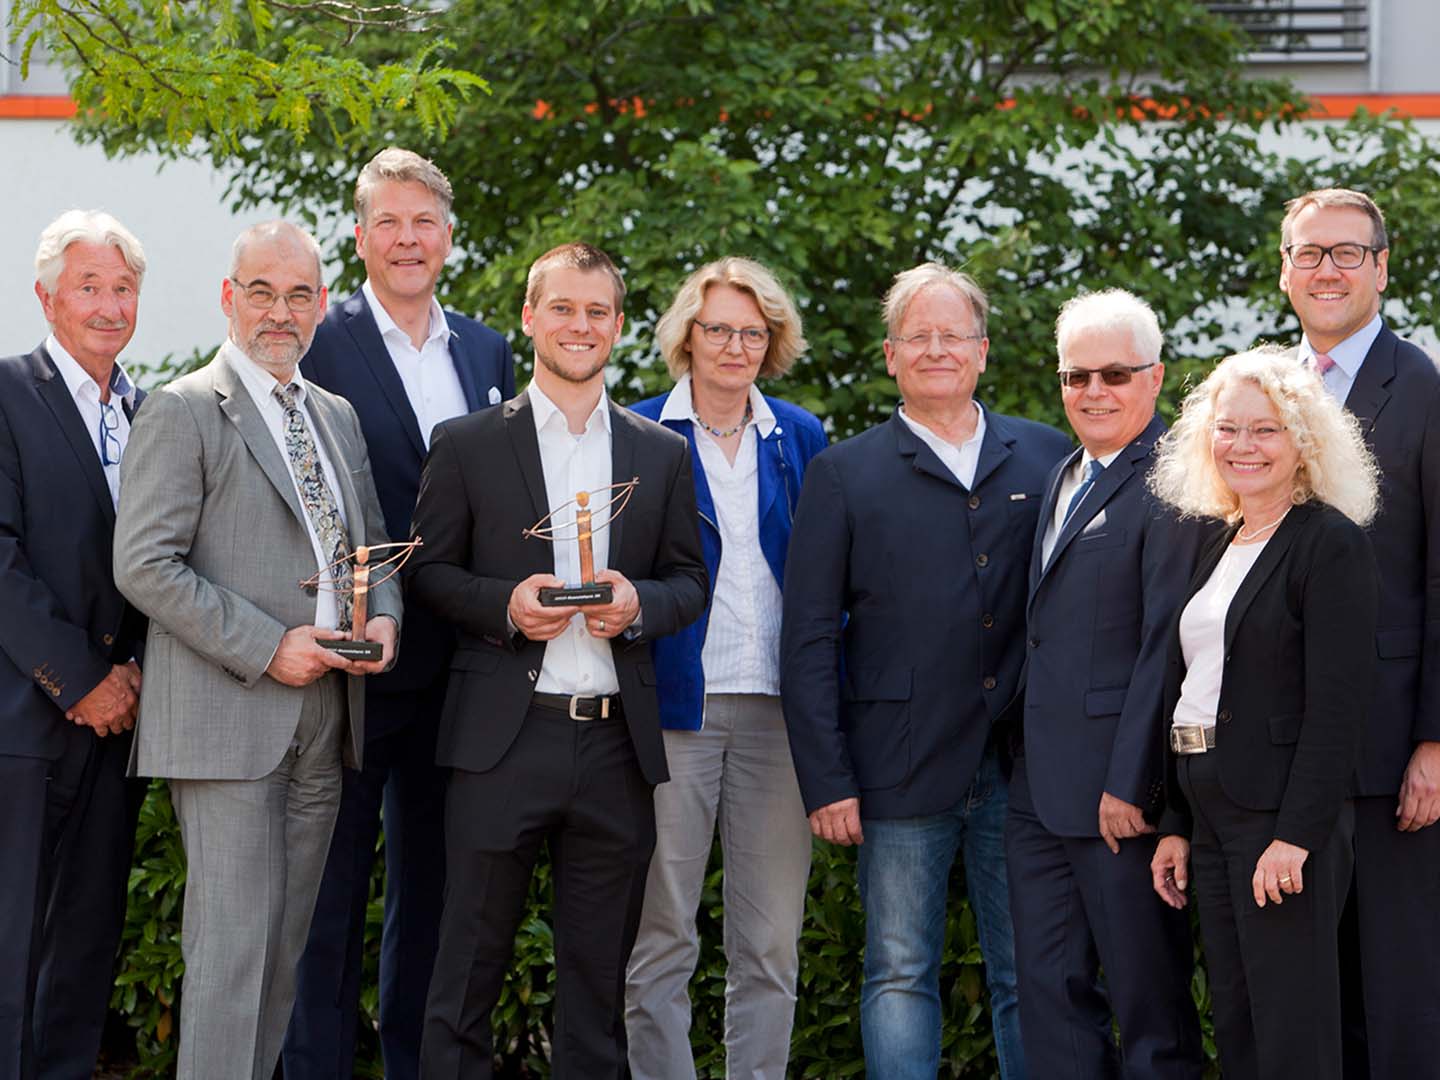 The winners of the UMSICHT Science Award 2019 